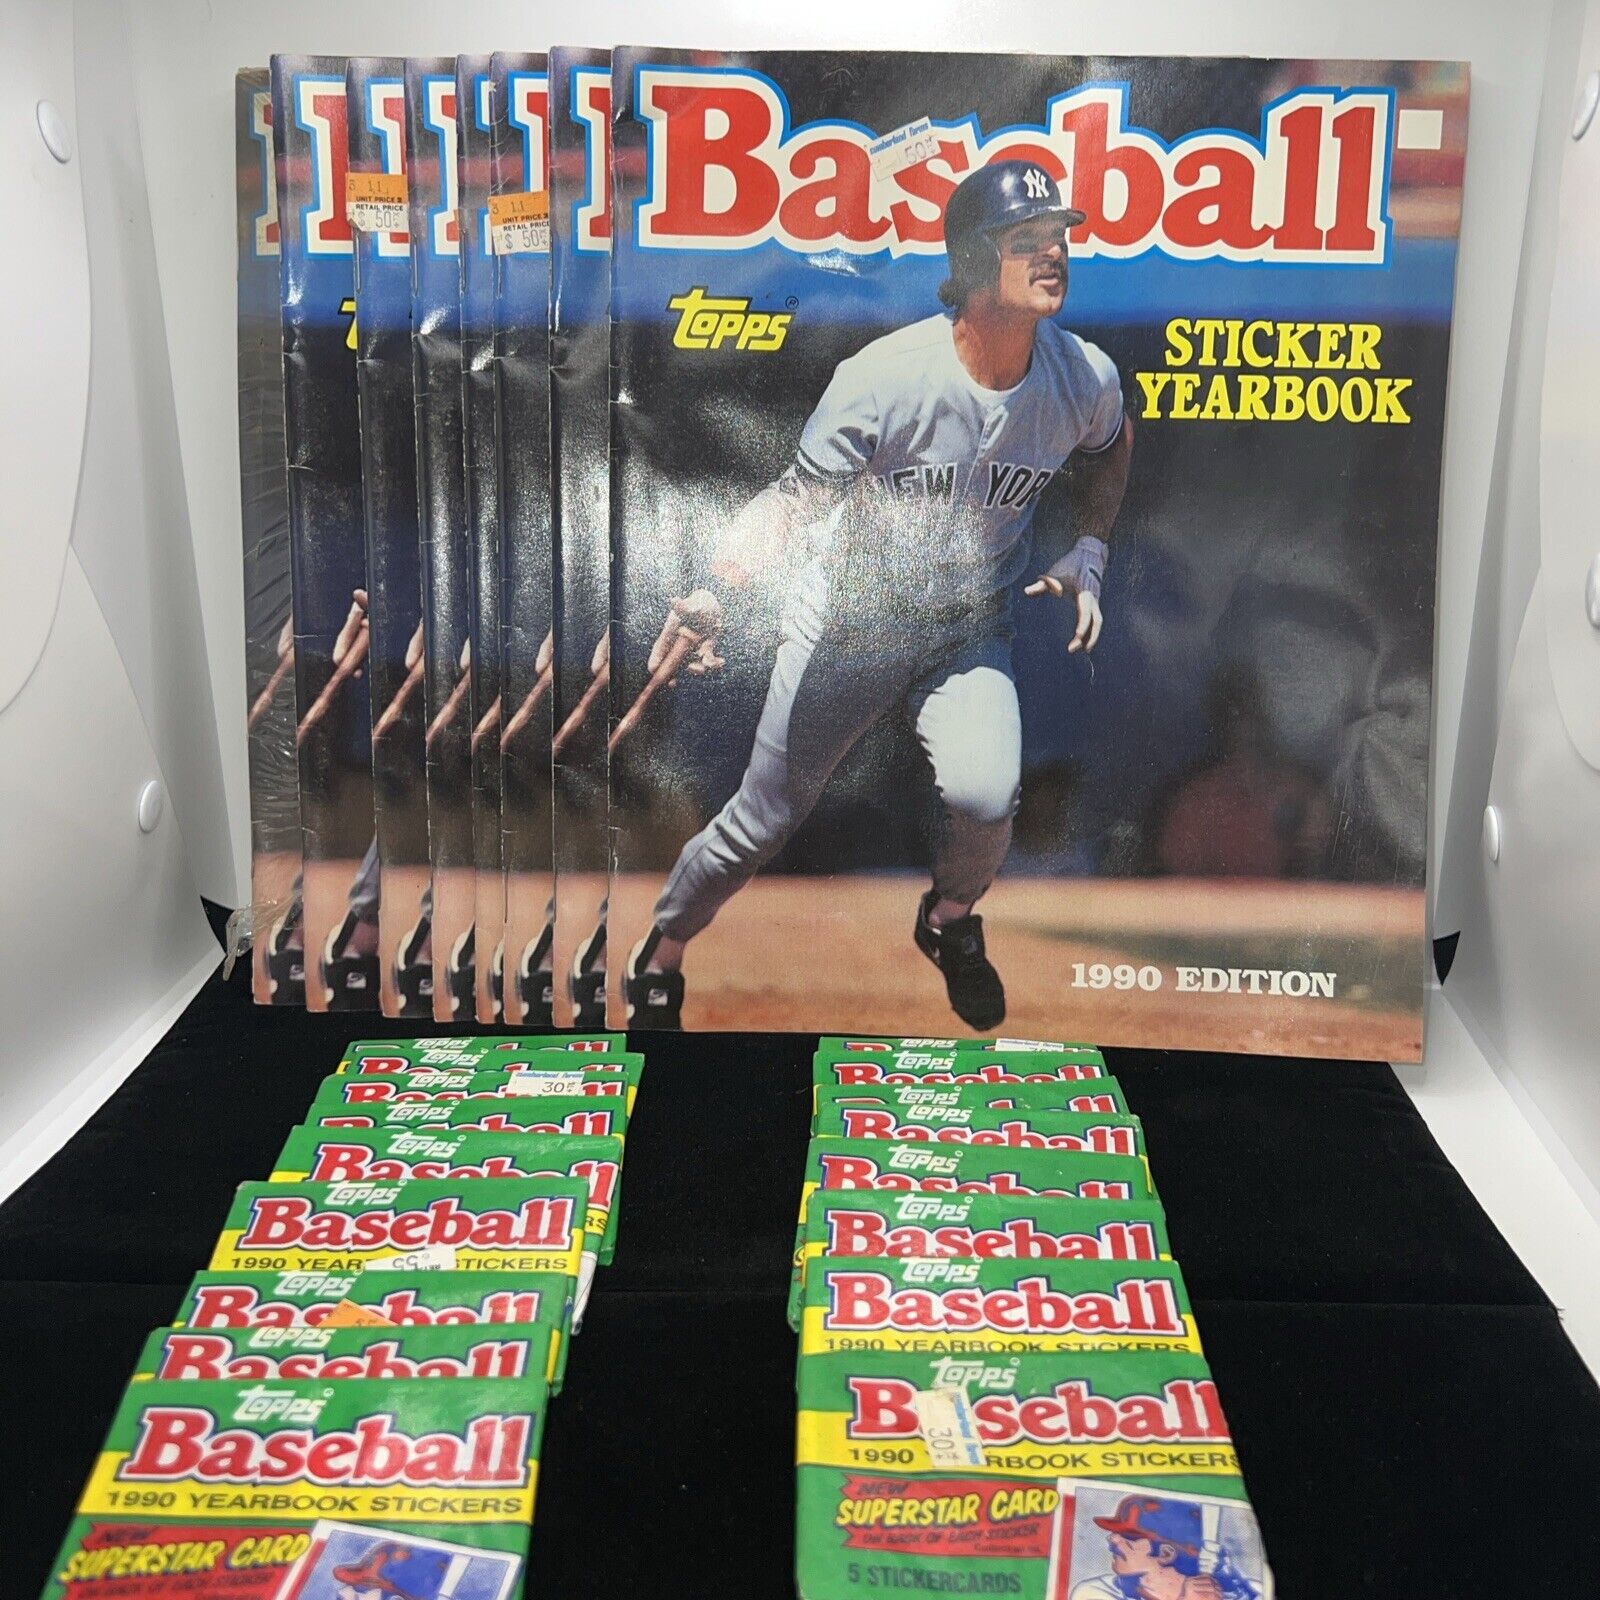 1990 Topps Baseball Sticker Yearbook Cover Page Feat. Don Mattingly & Stickers